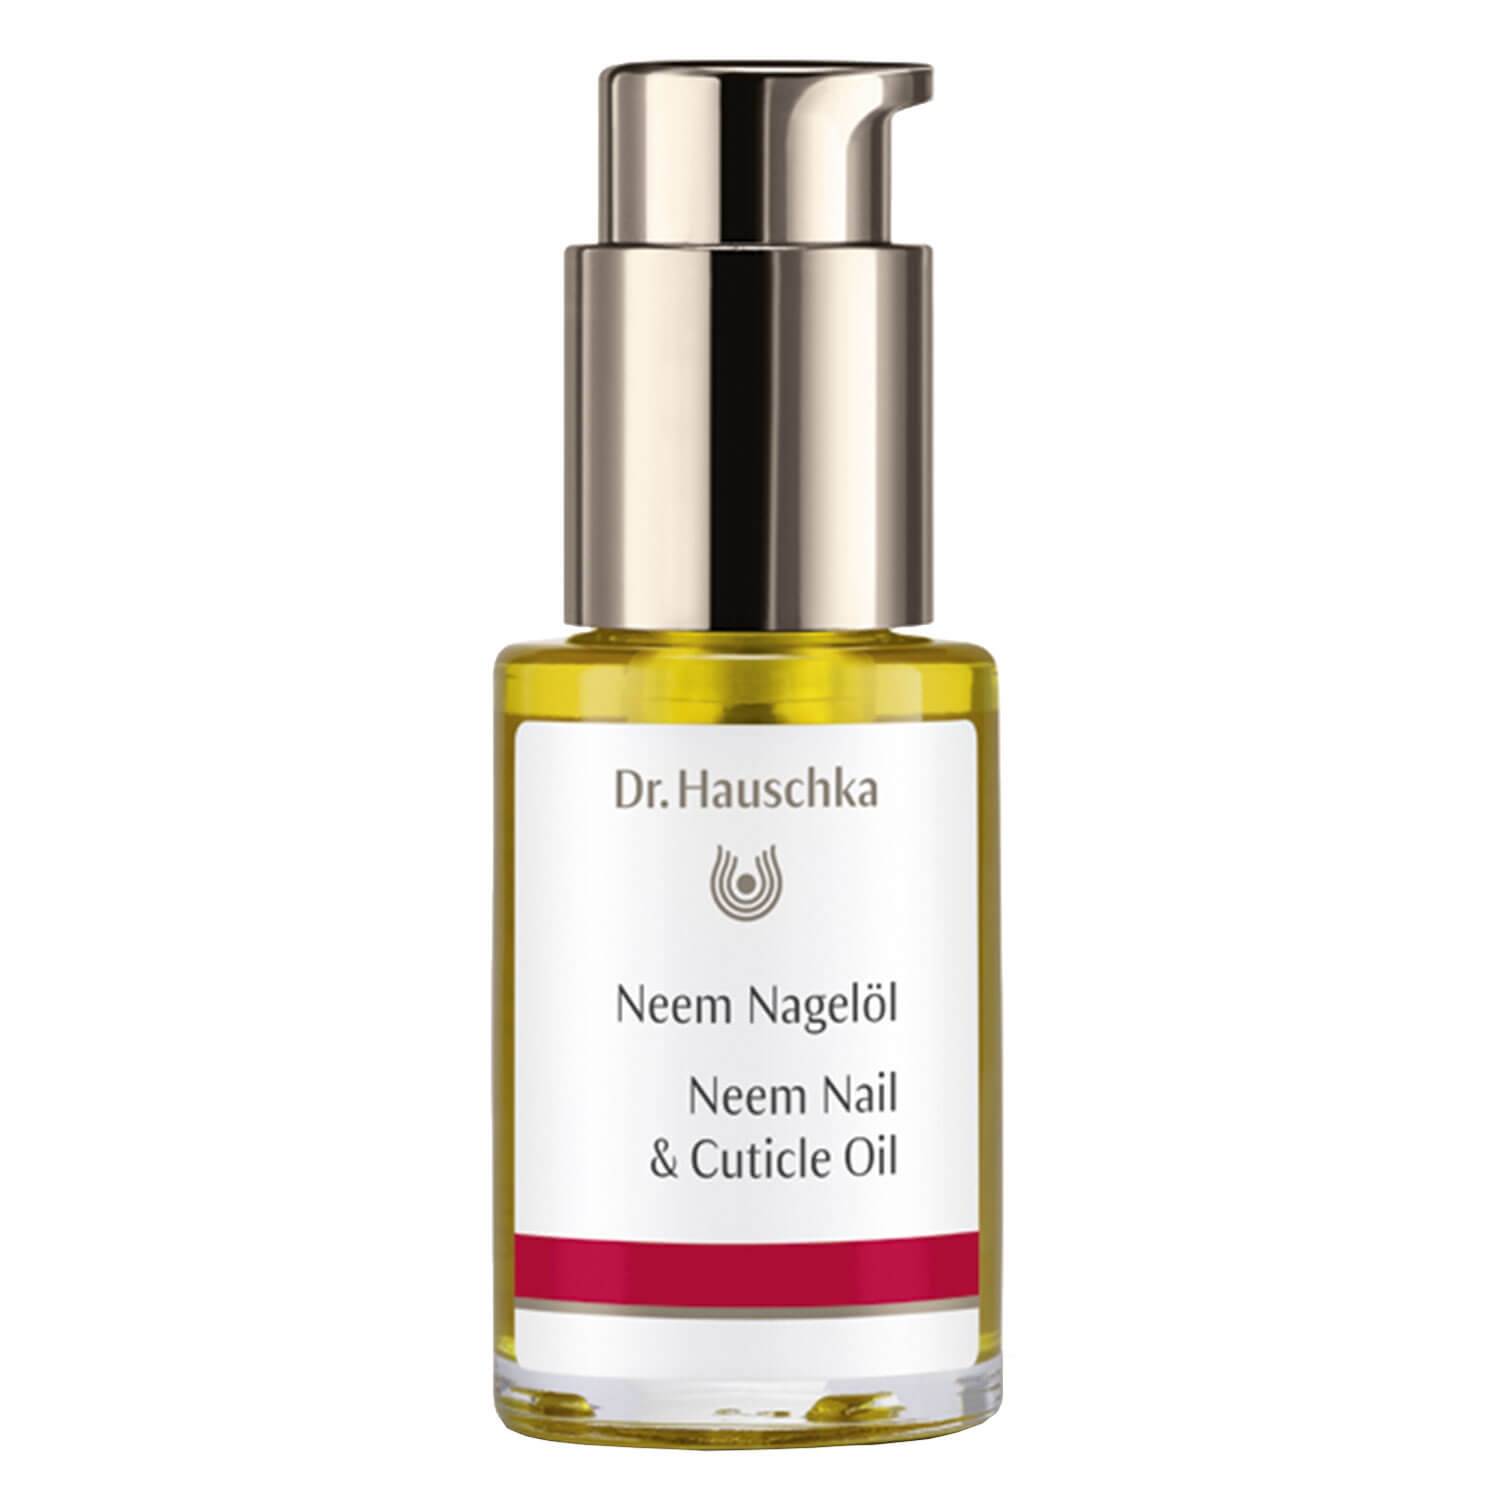 Product image from Dr. Hauschka - Neem Nagelöl